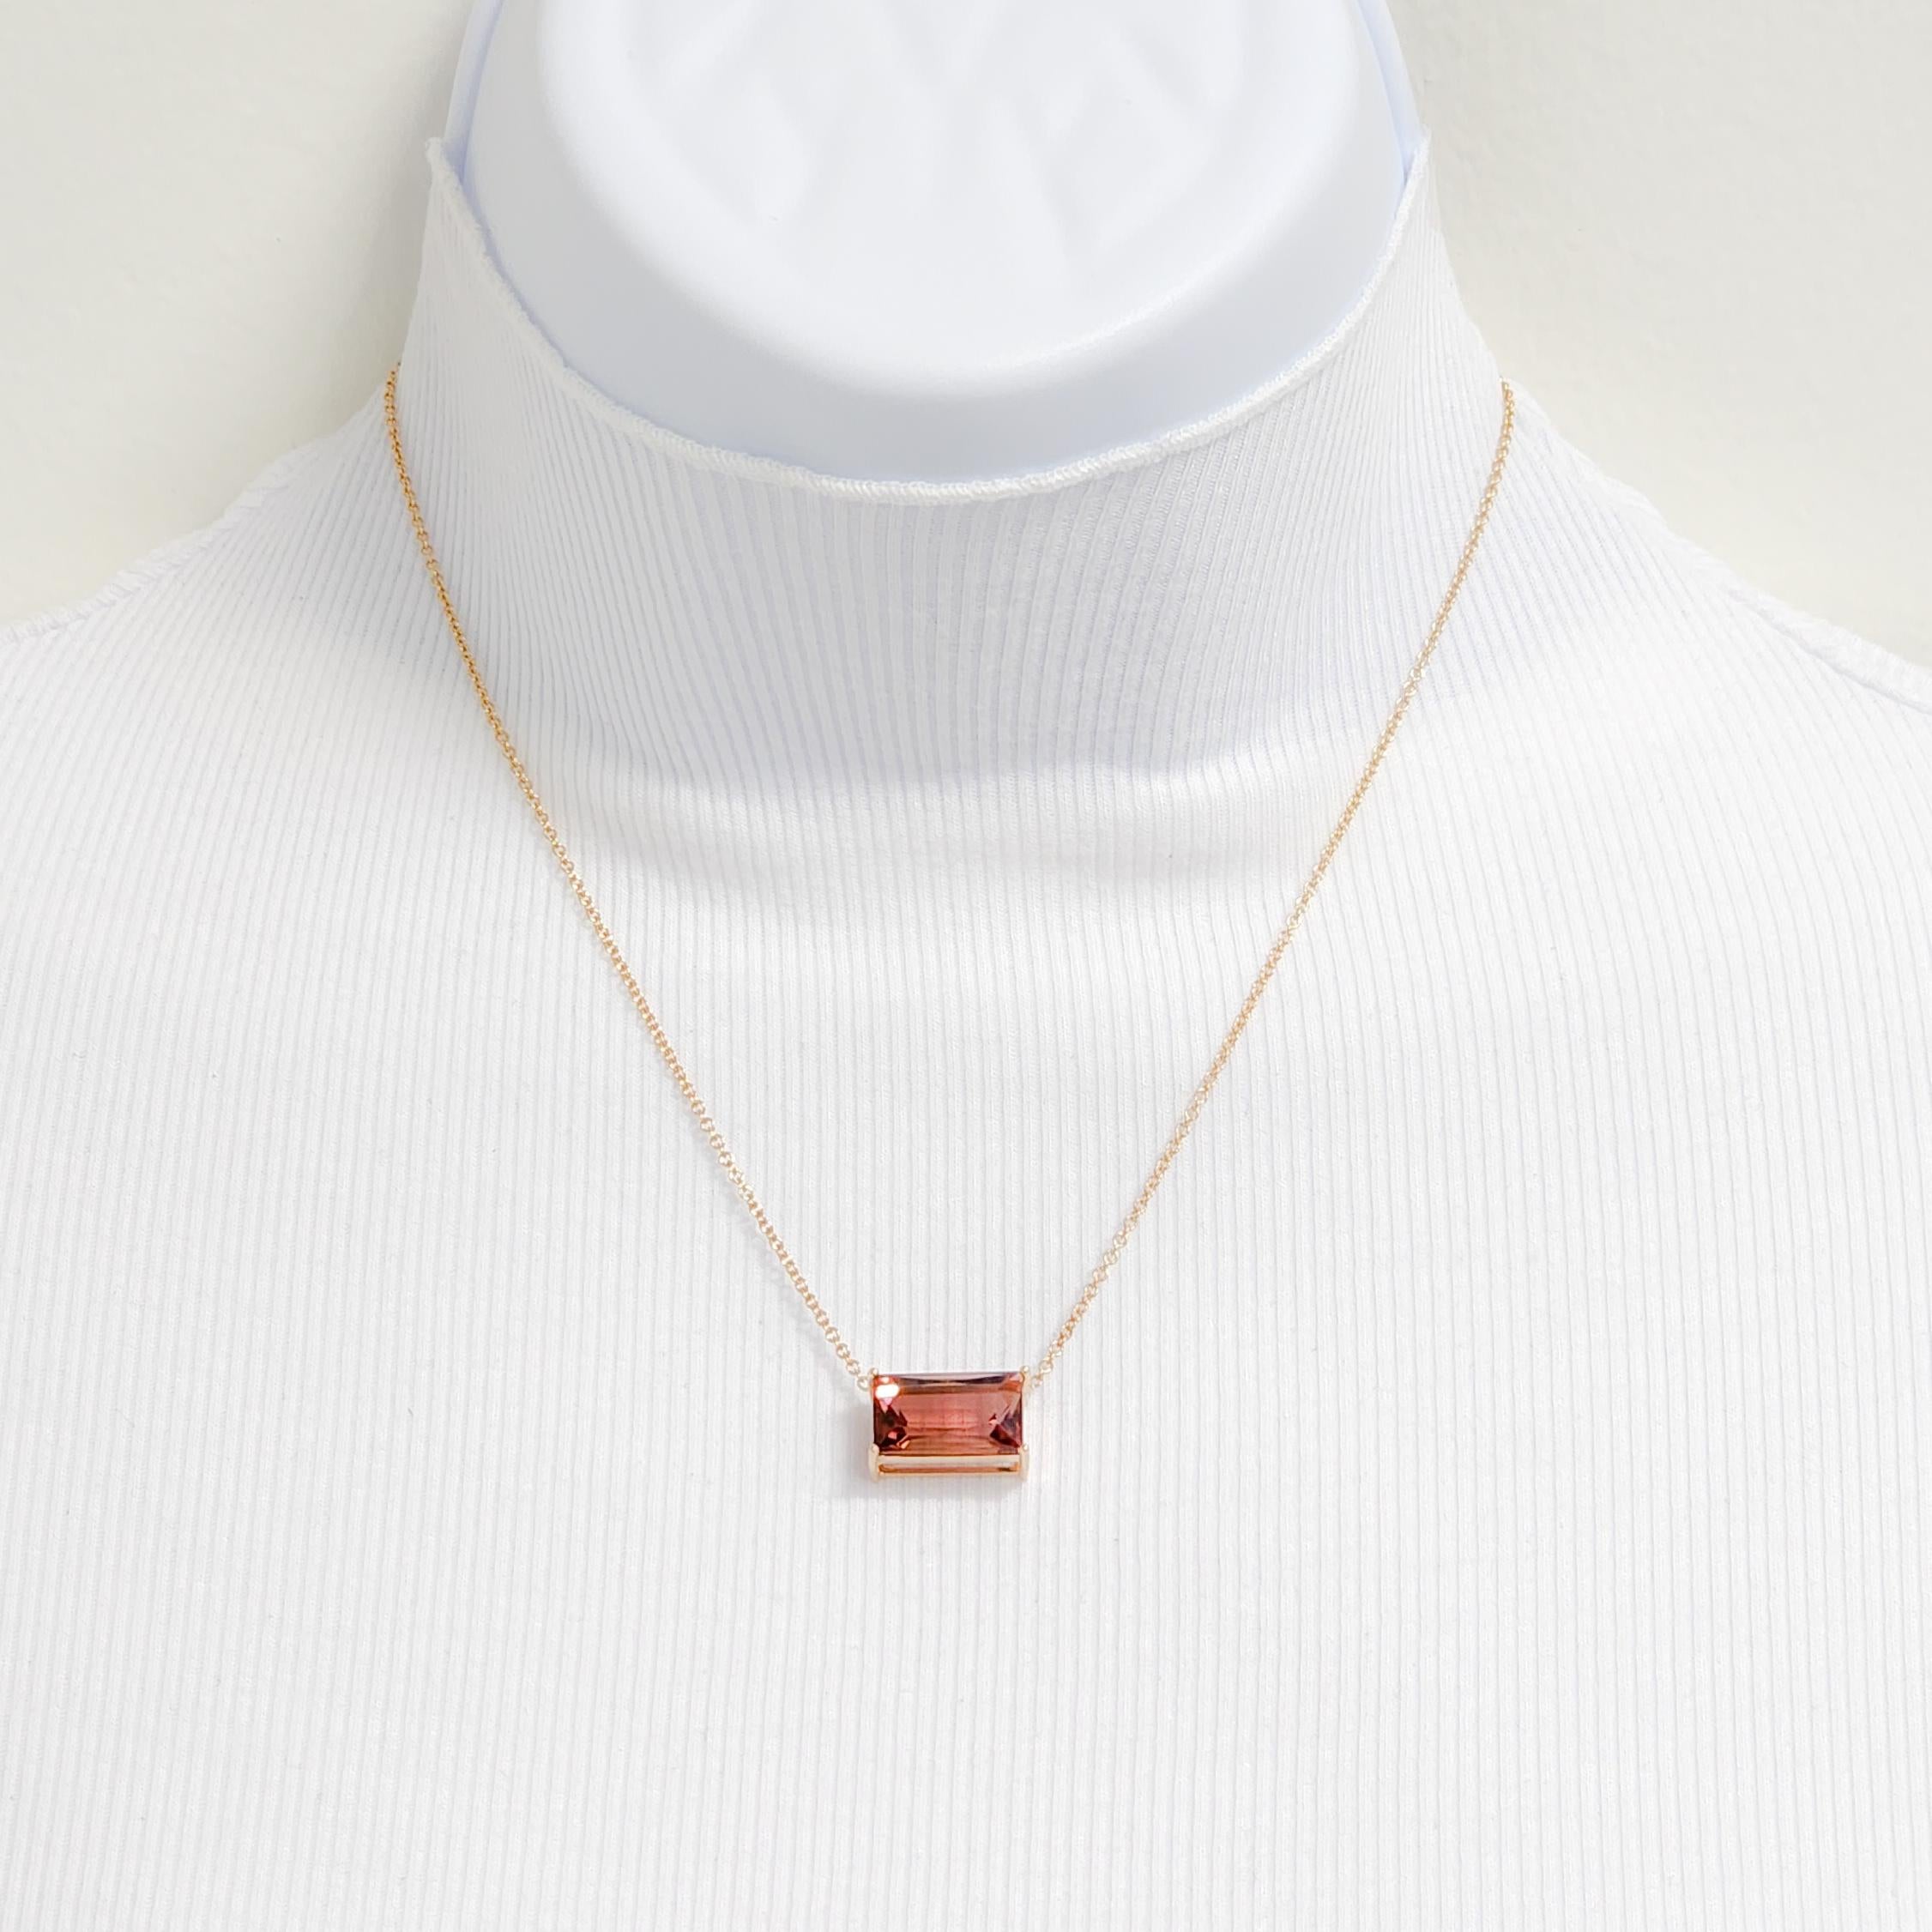 Pink Tourmaline Pendant Necklace in 18k Rose Gold 2